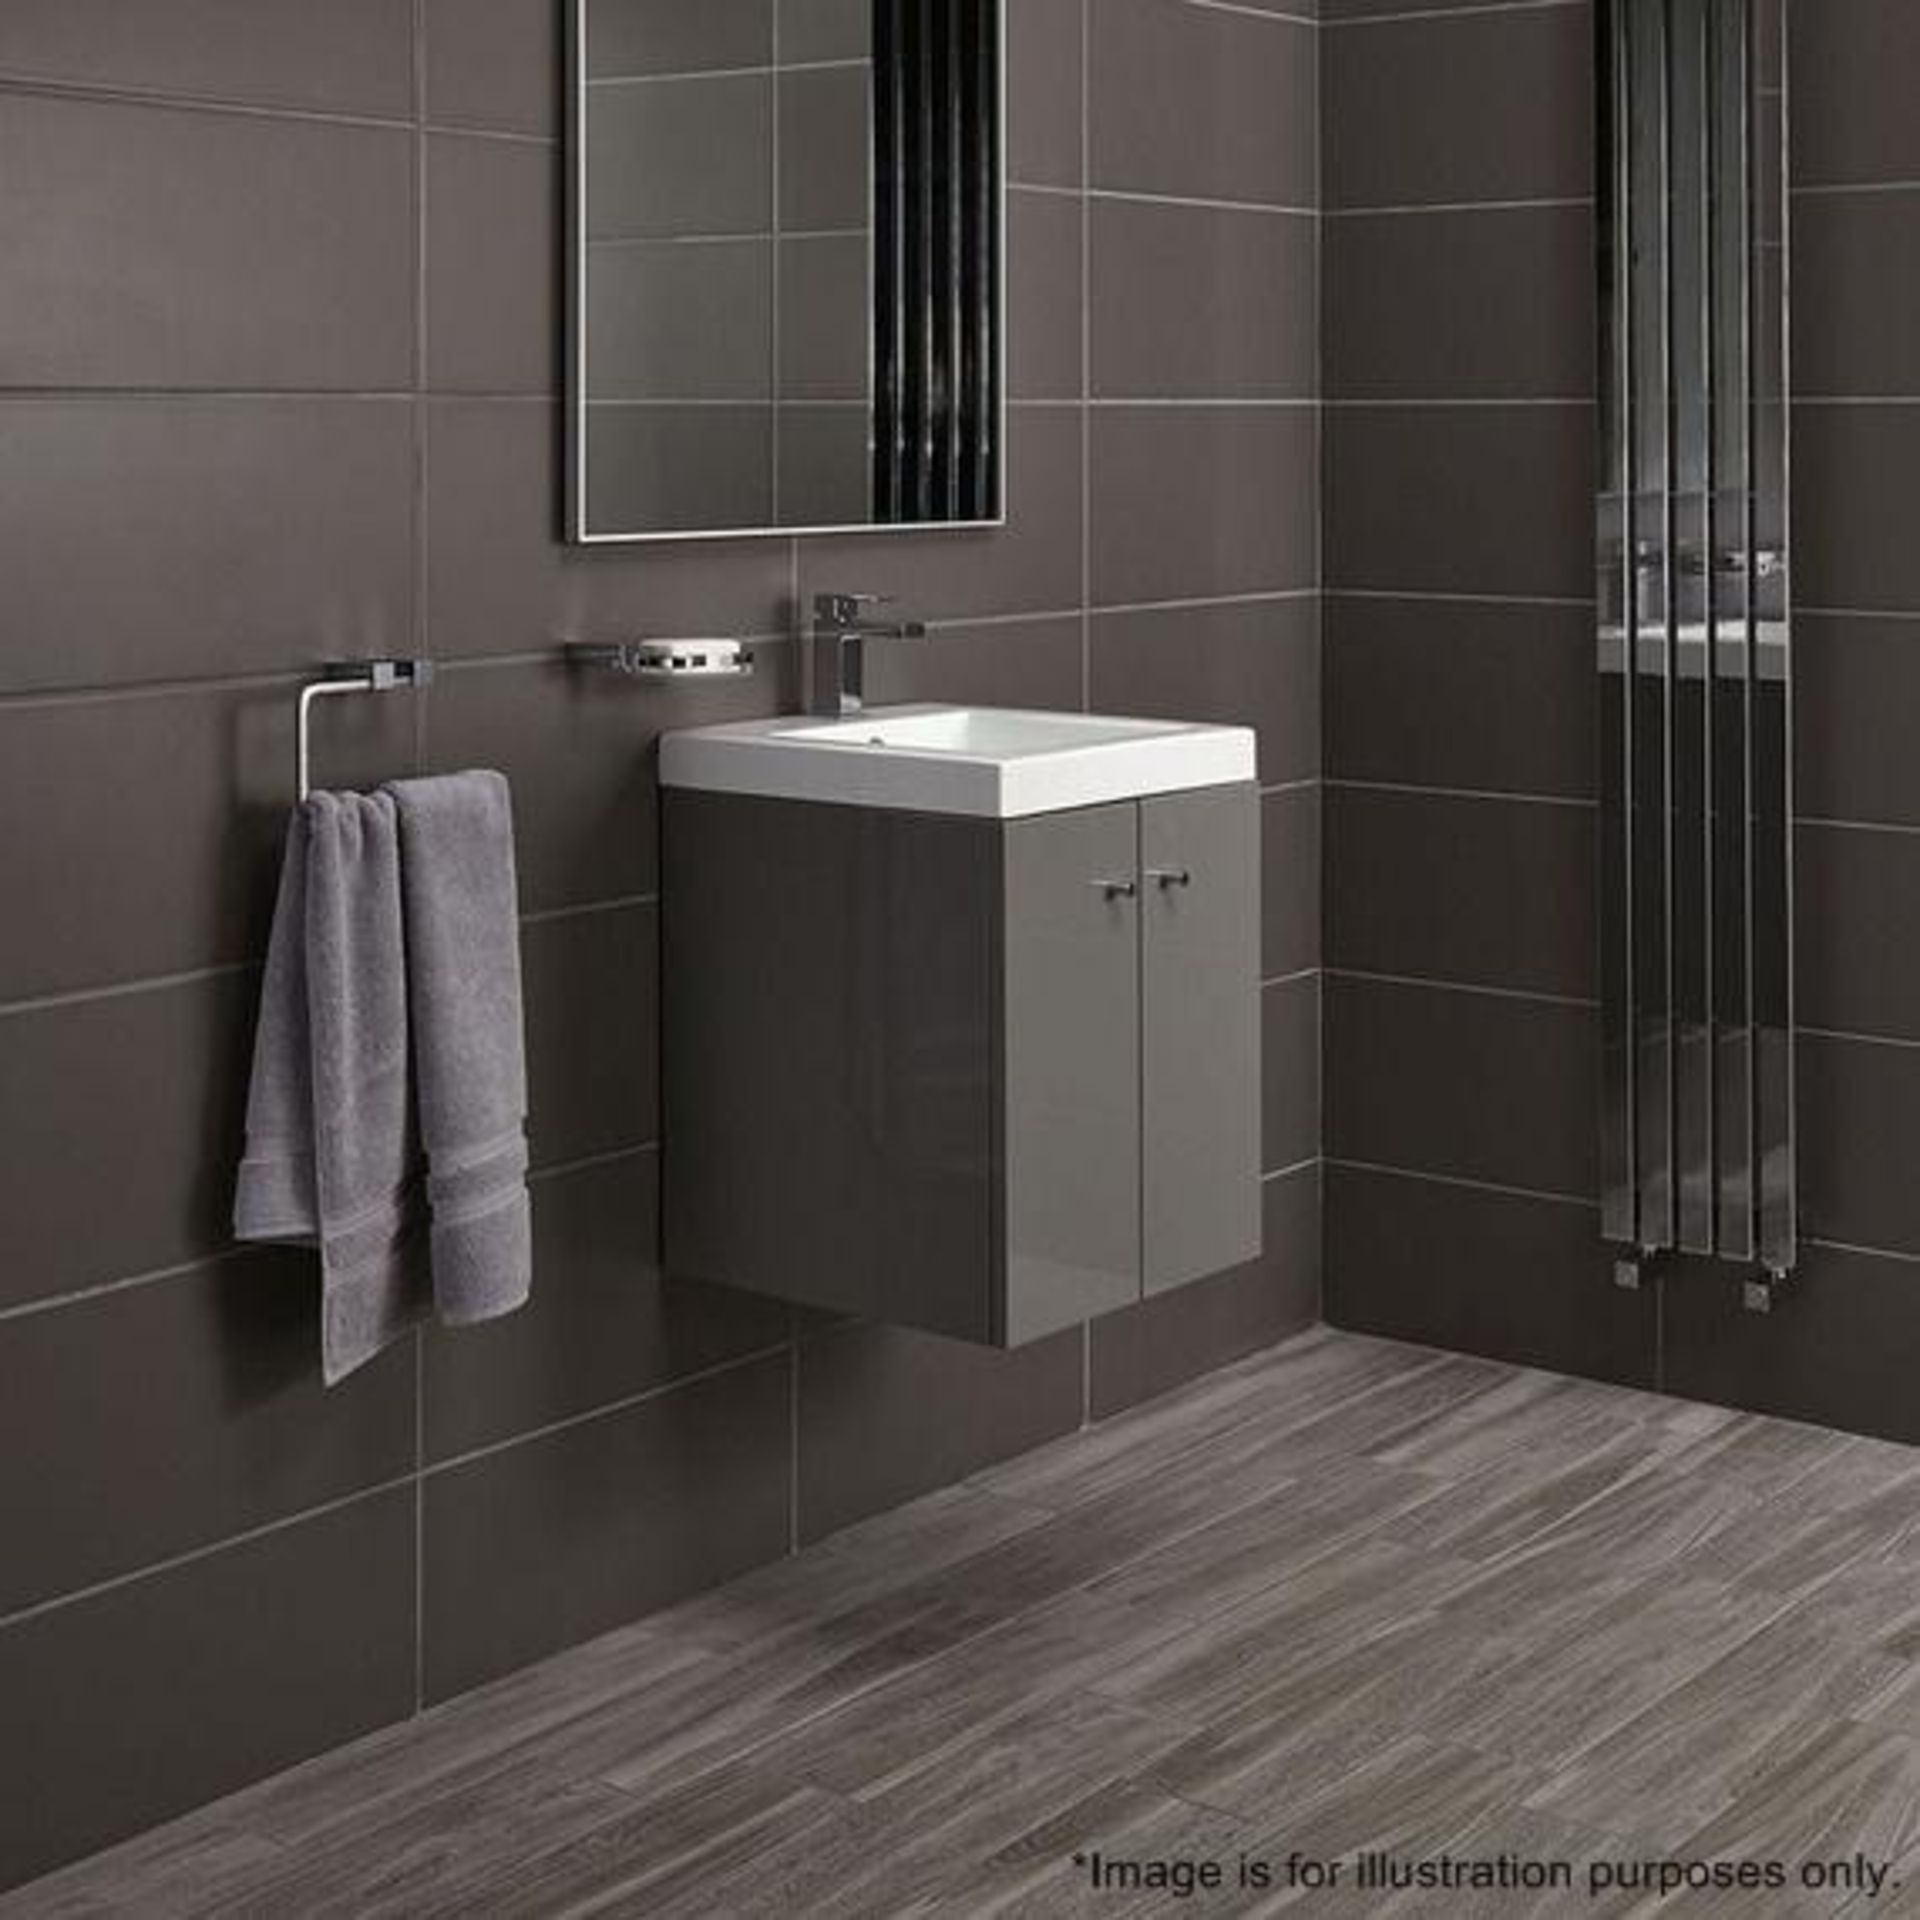 10 x Alpine Duo 400 Wall Hung Vanity Units In Gloss Grey - Brand New Boxed Stock - Dimensions: H49 x - Image 5 of 5